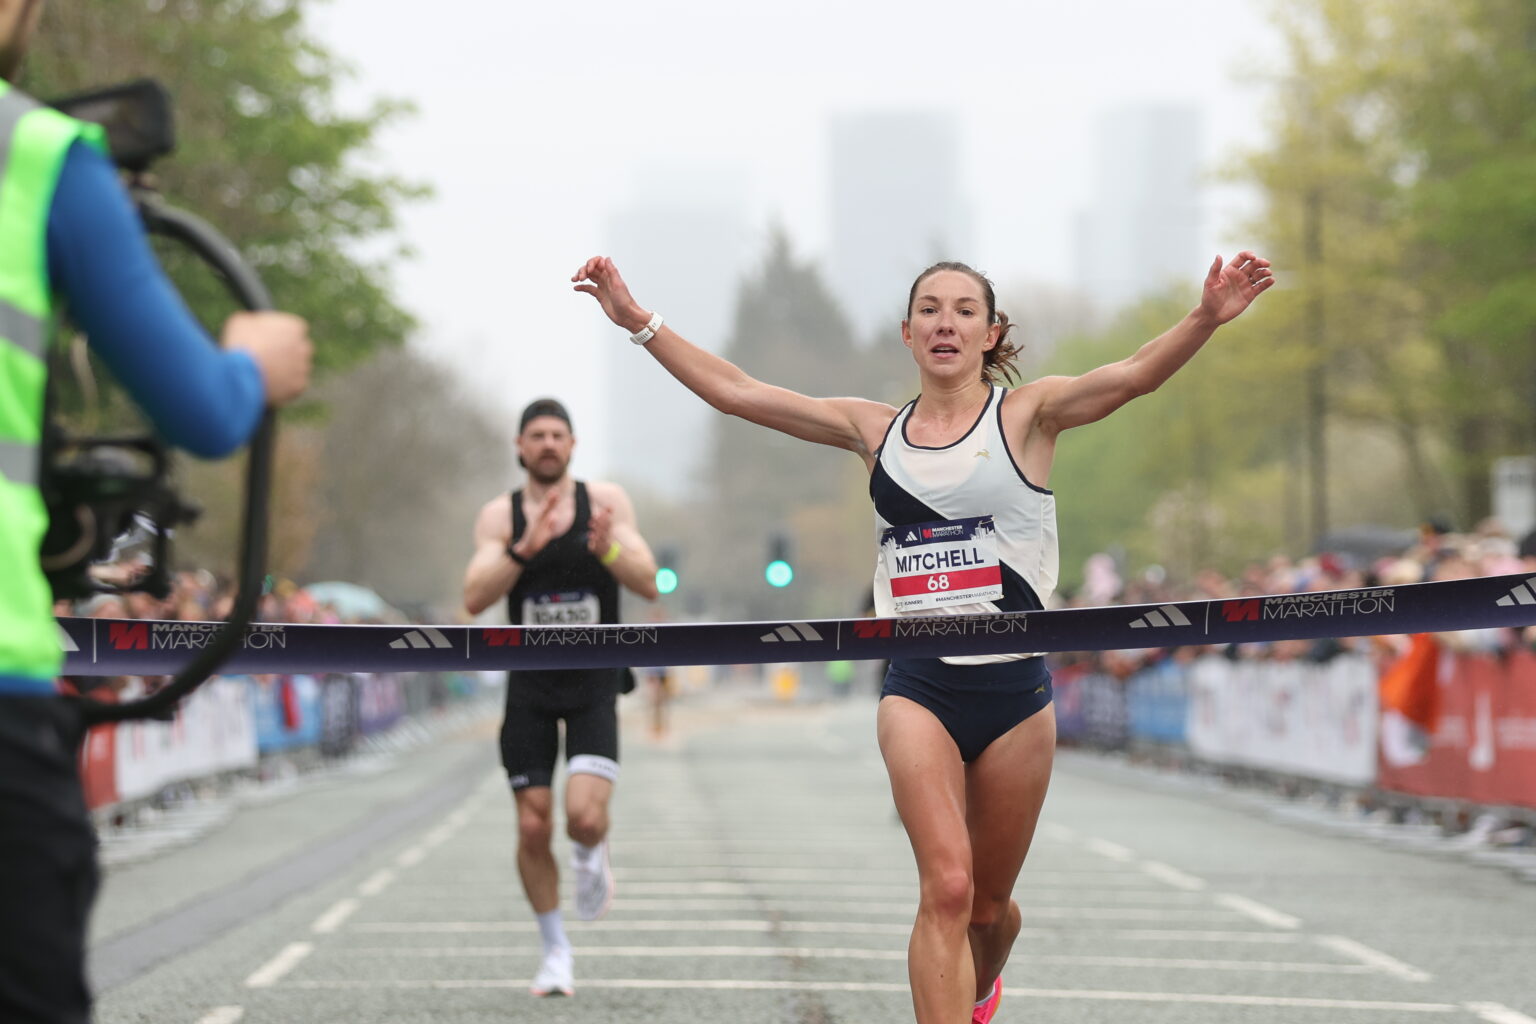 Winners of the 2023 adidas Manchester Marathon Confirmed Manchester